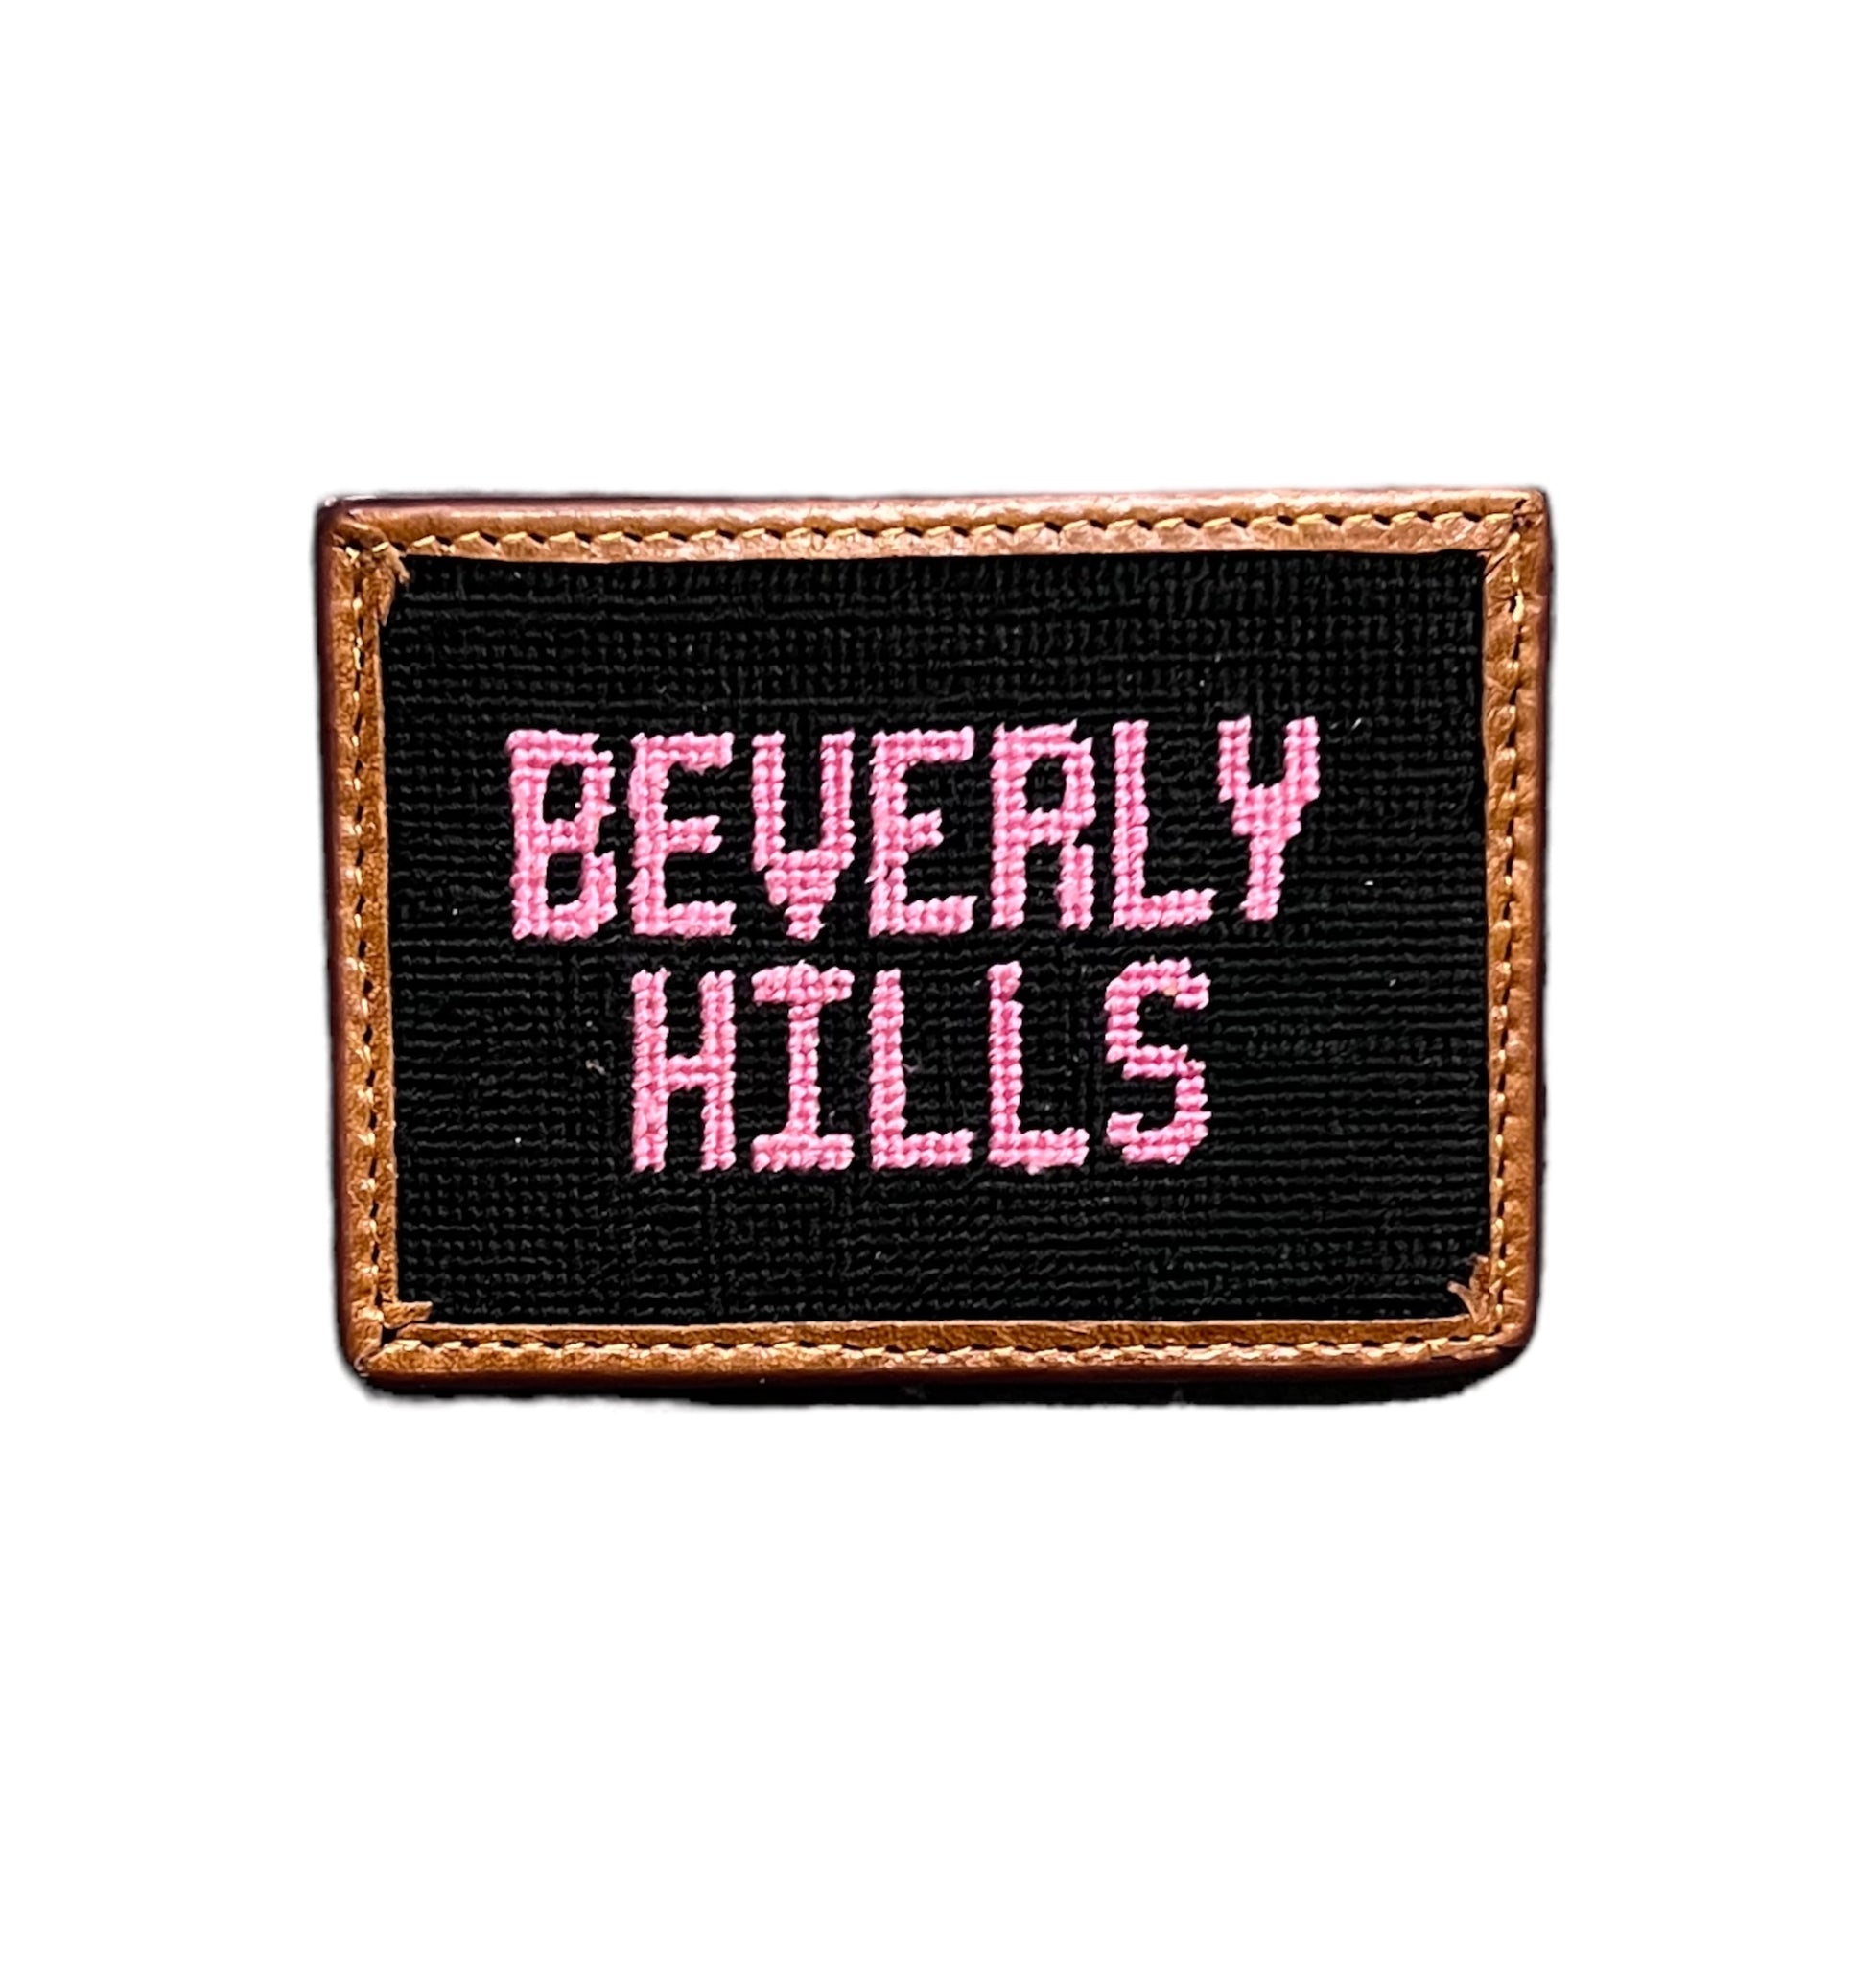 BEVERLY HILLS CREDIT CARD WALLET